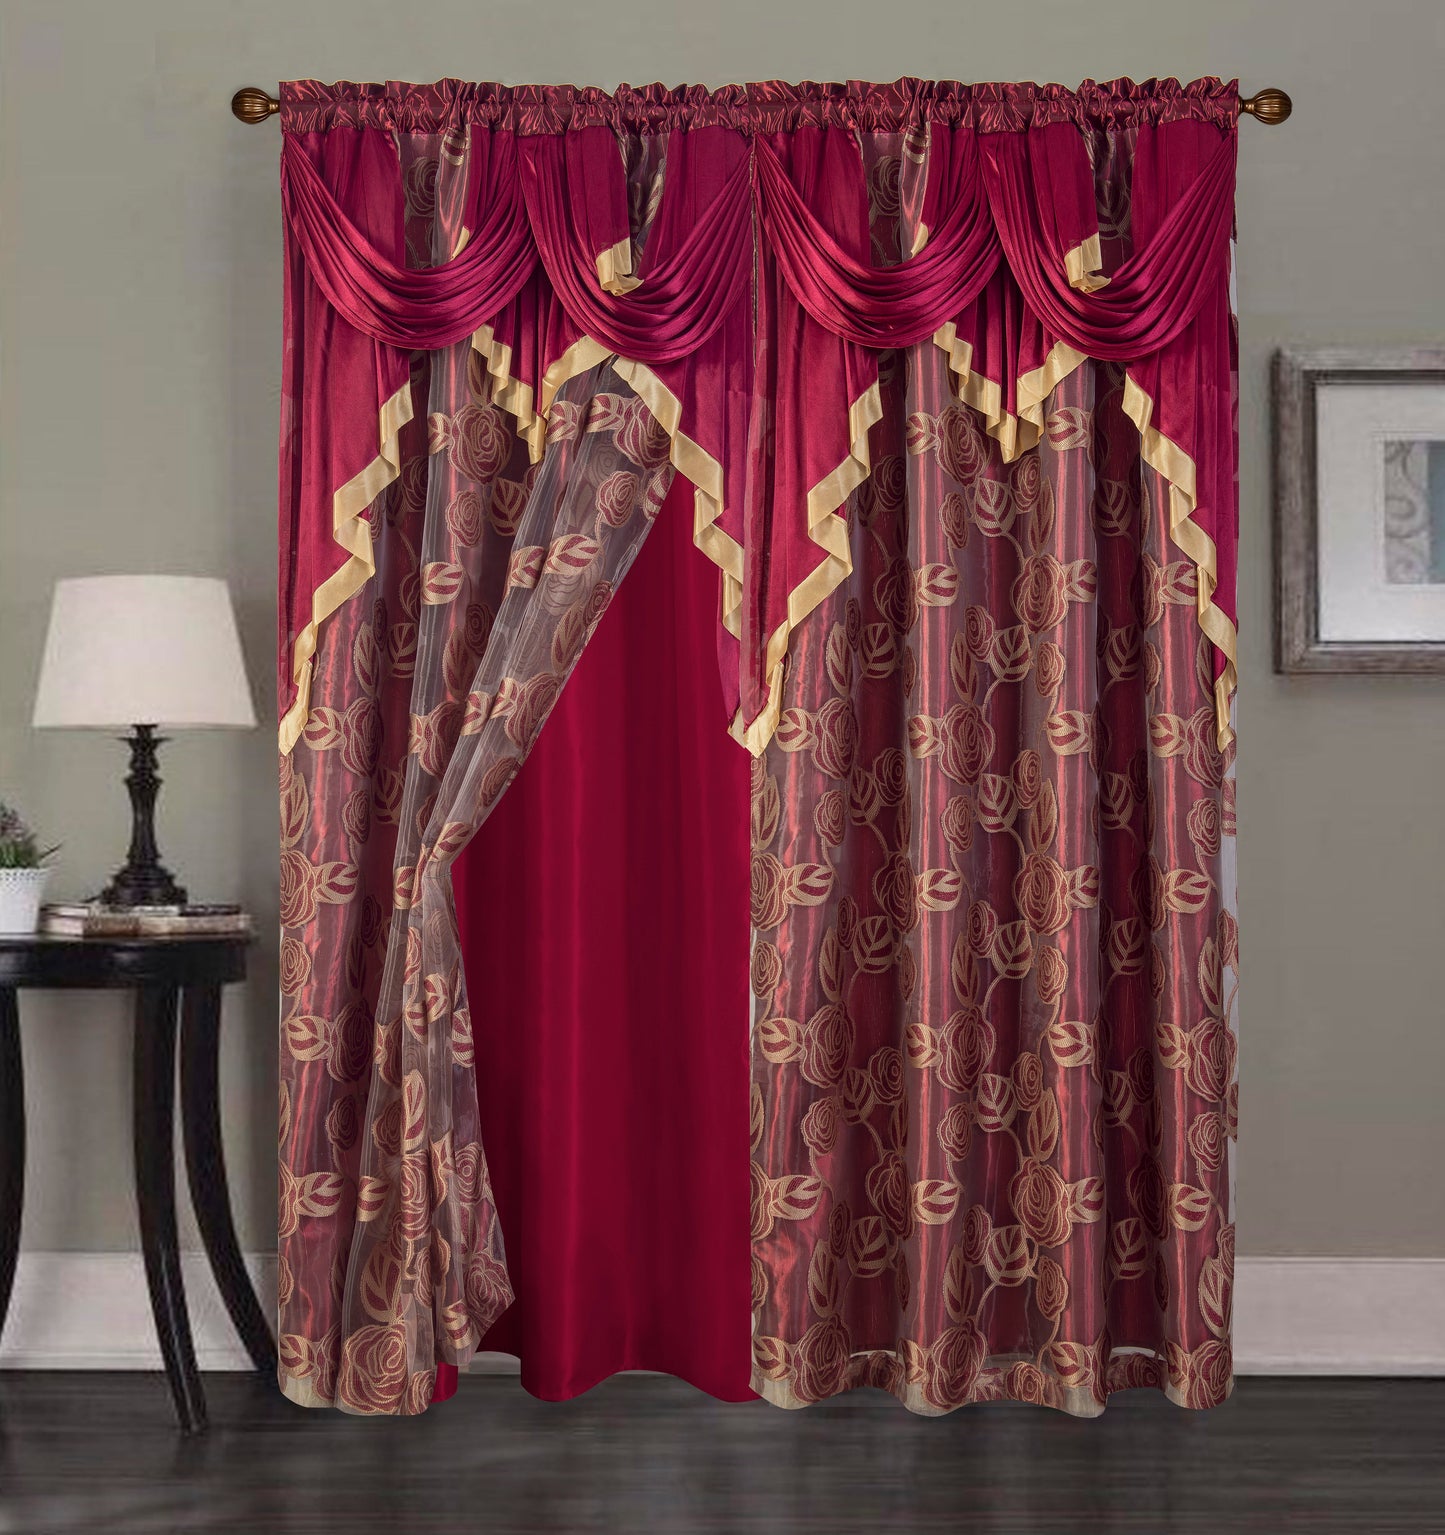 2PC CURTAIN SET W/ ATTACHED VALANCE & BACKING - Gill